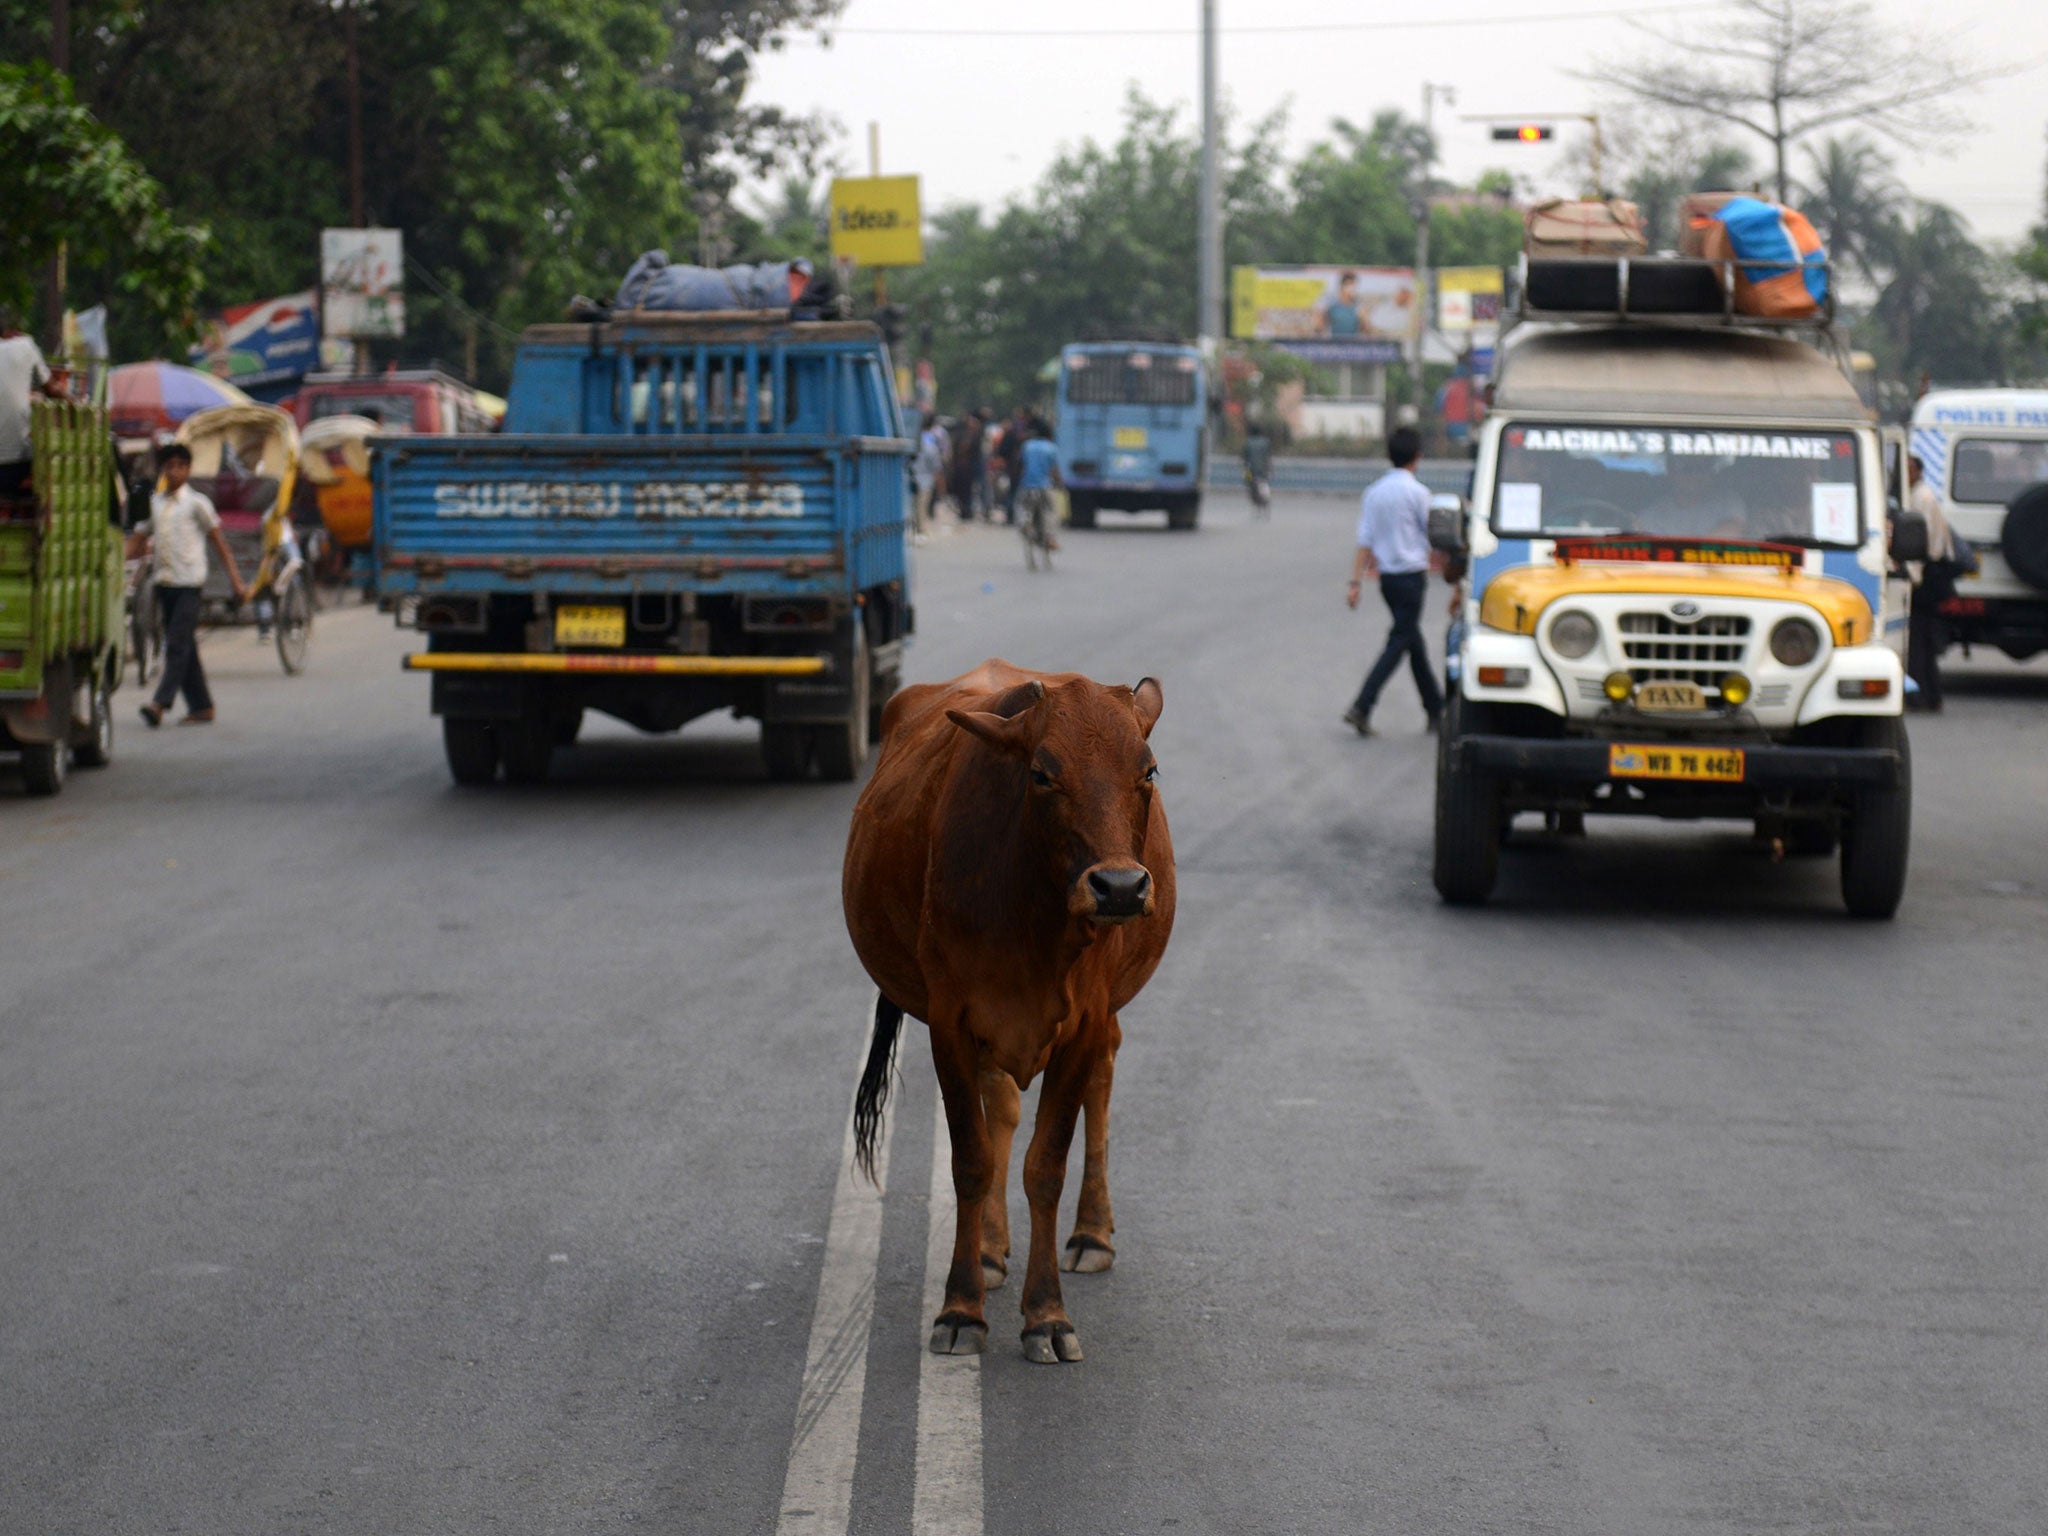 Cows are considered sacred by many people in India